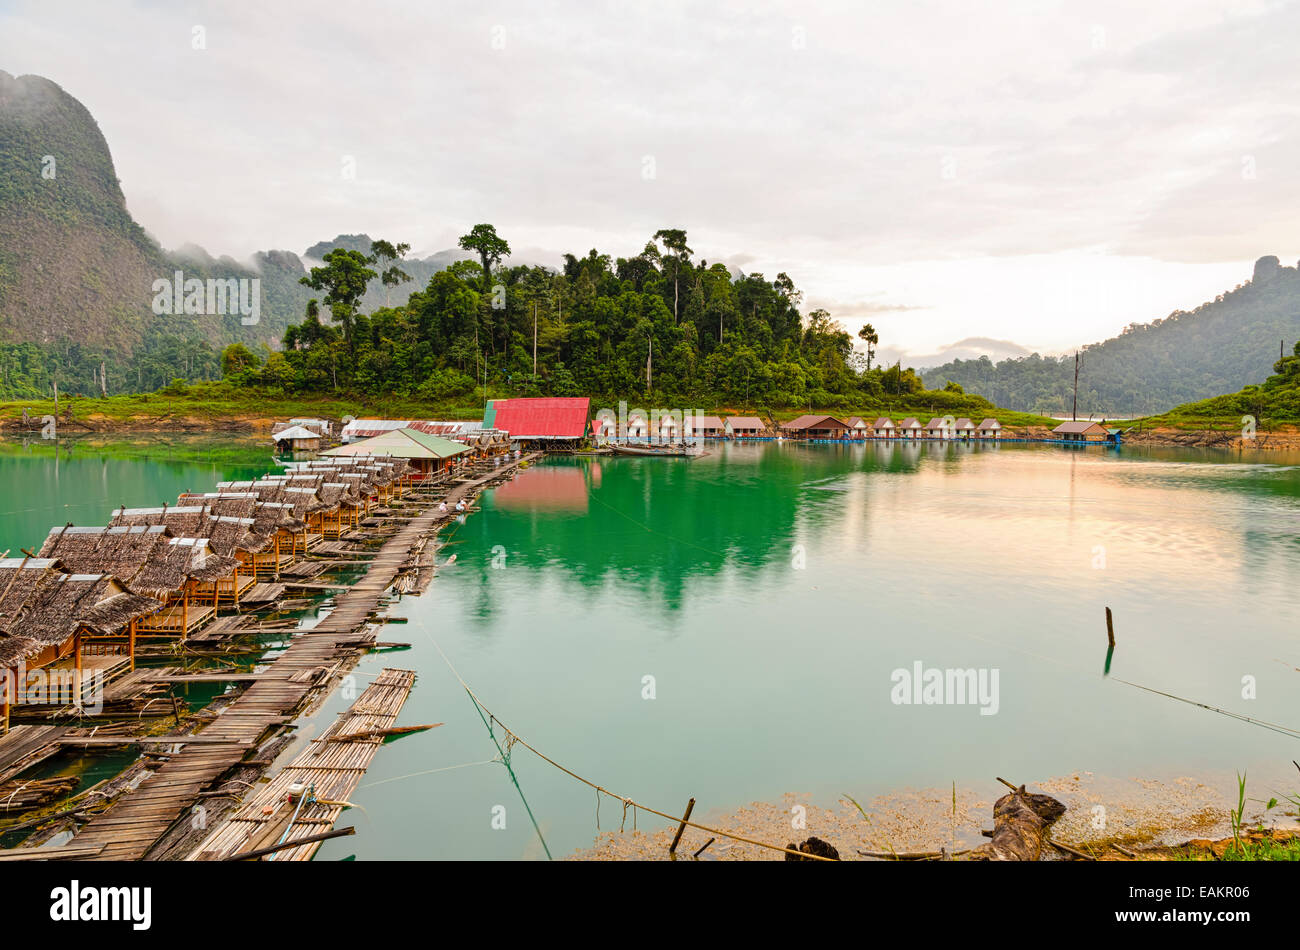 Atmosphere of bamboo floating resort in the morning at Ratchaprapha Dam, Khao Sok National Park, Surat Thani Province, Thailand Stock Photo